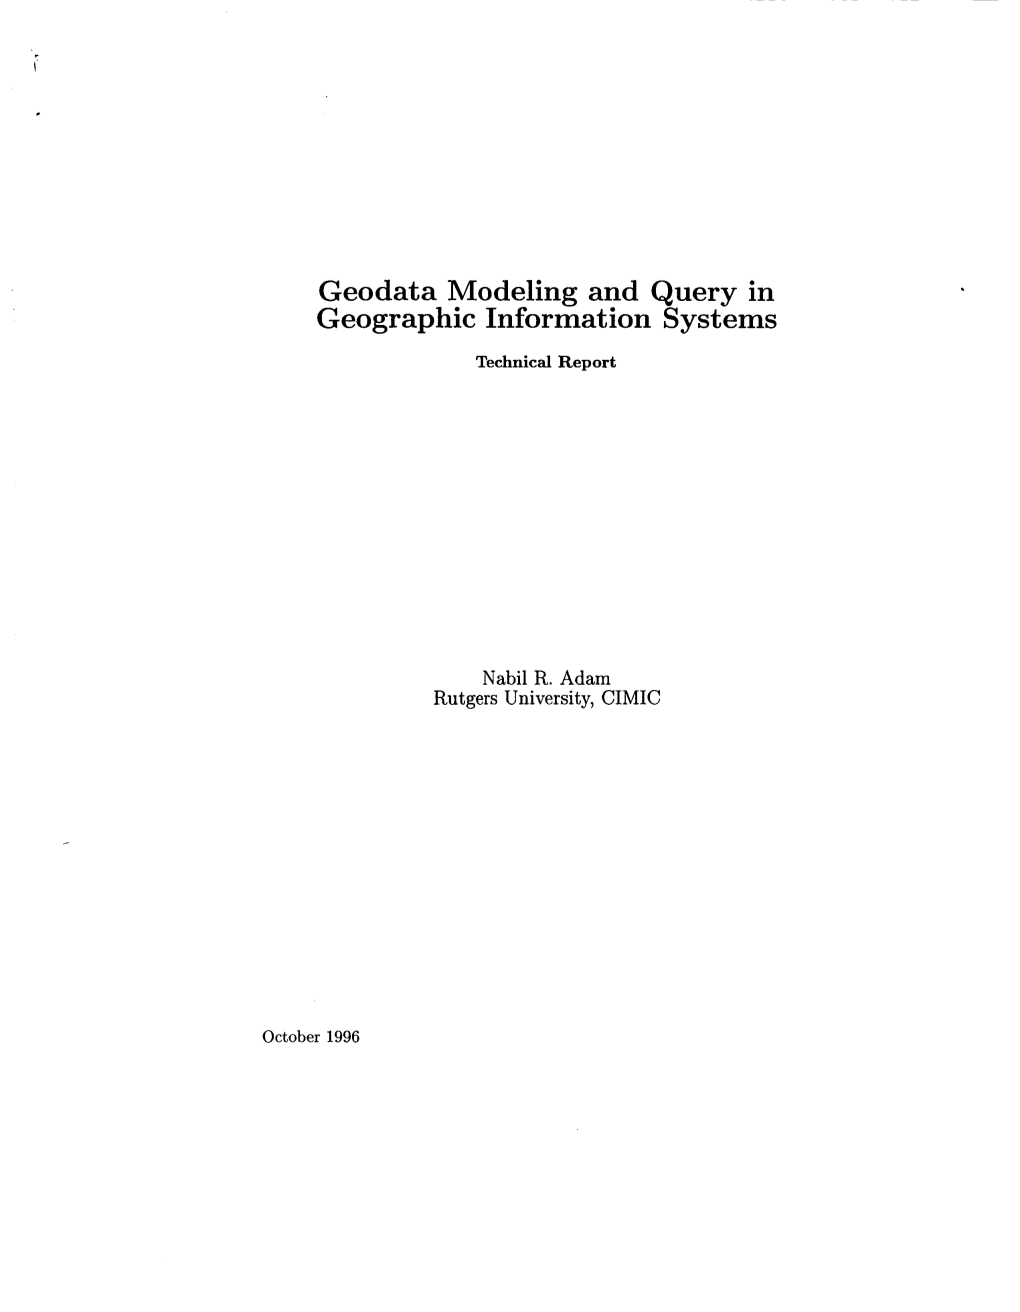 Geodata Modeling and Query in Geographic Information Systems